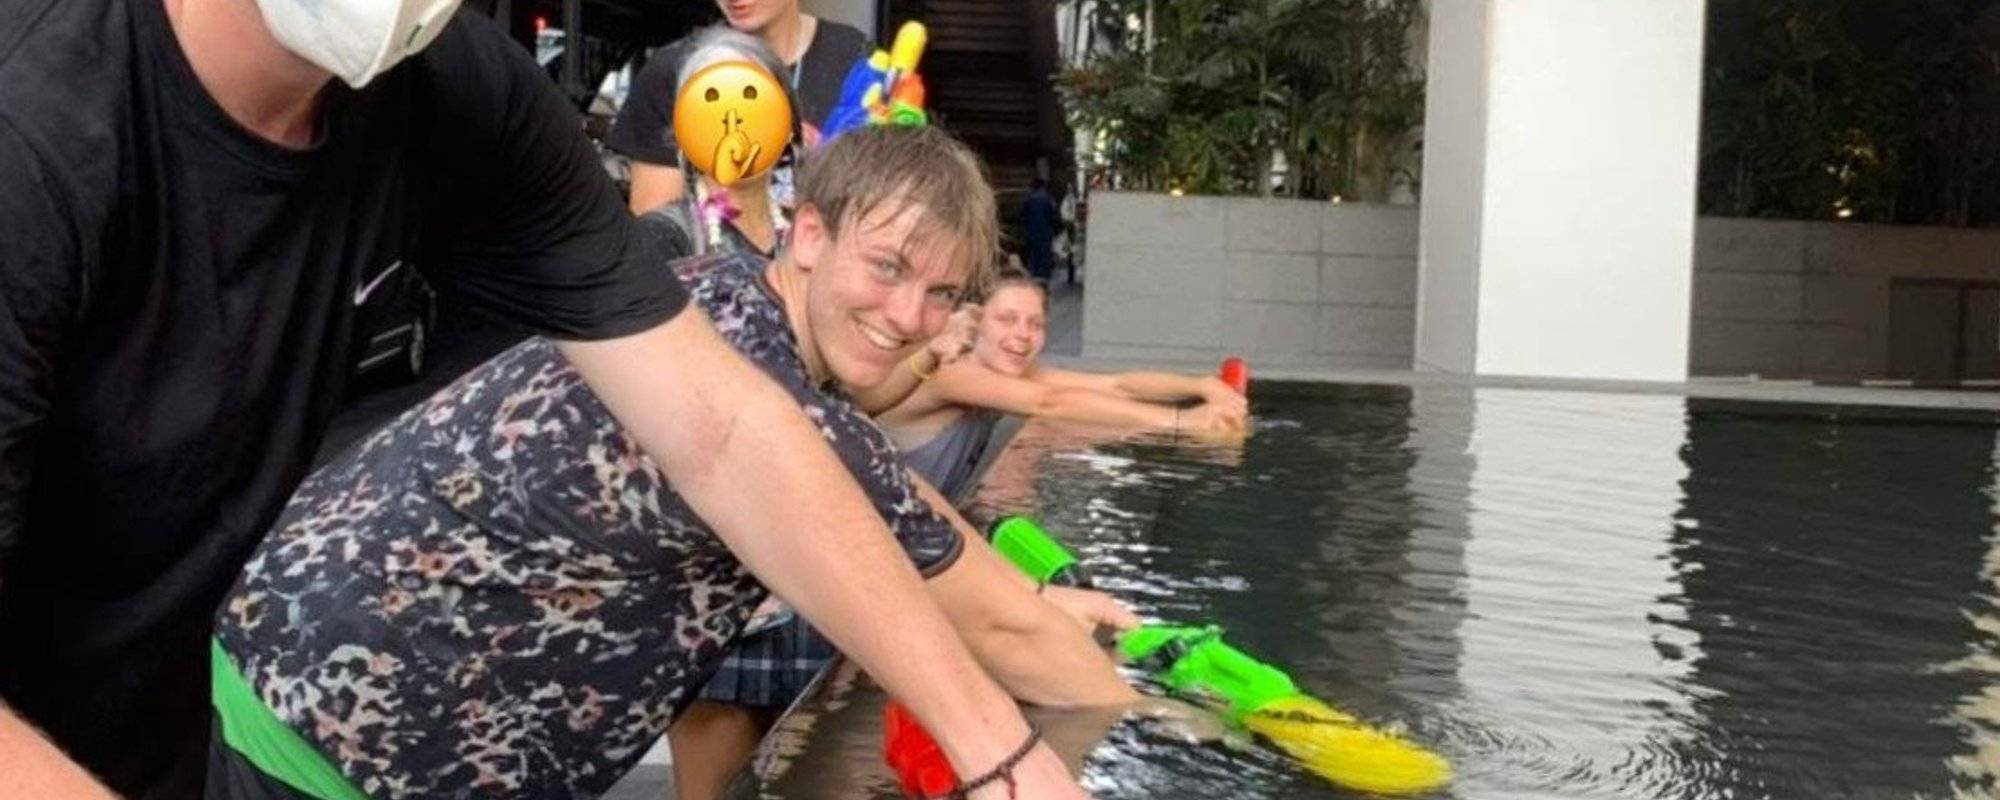 Happy Songkran 2019! The biggest water fight in the World - Bangkok, Thailand